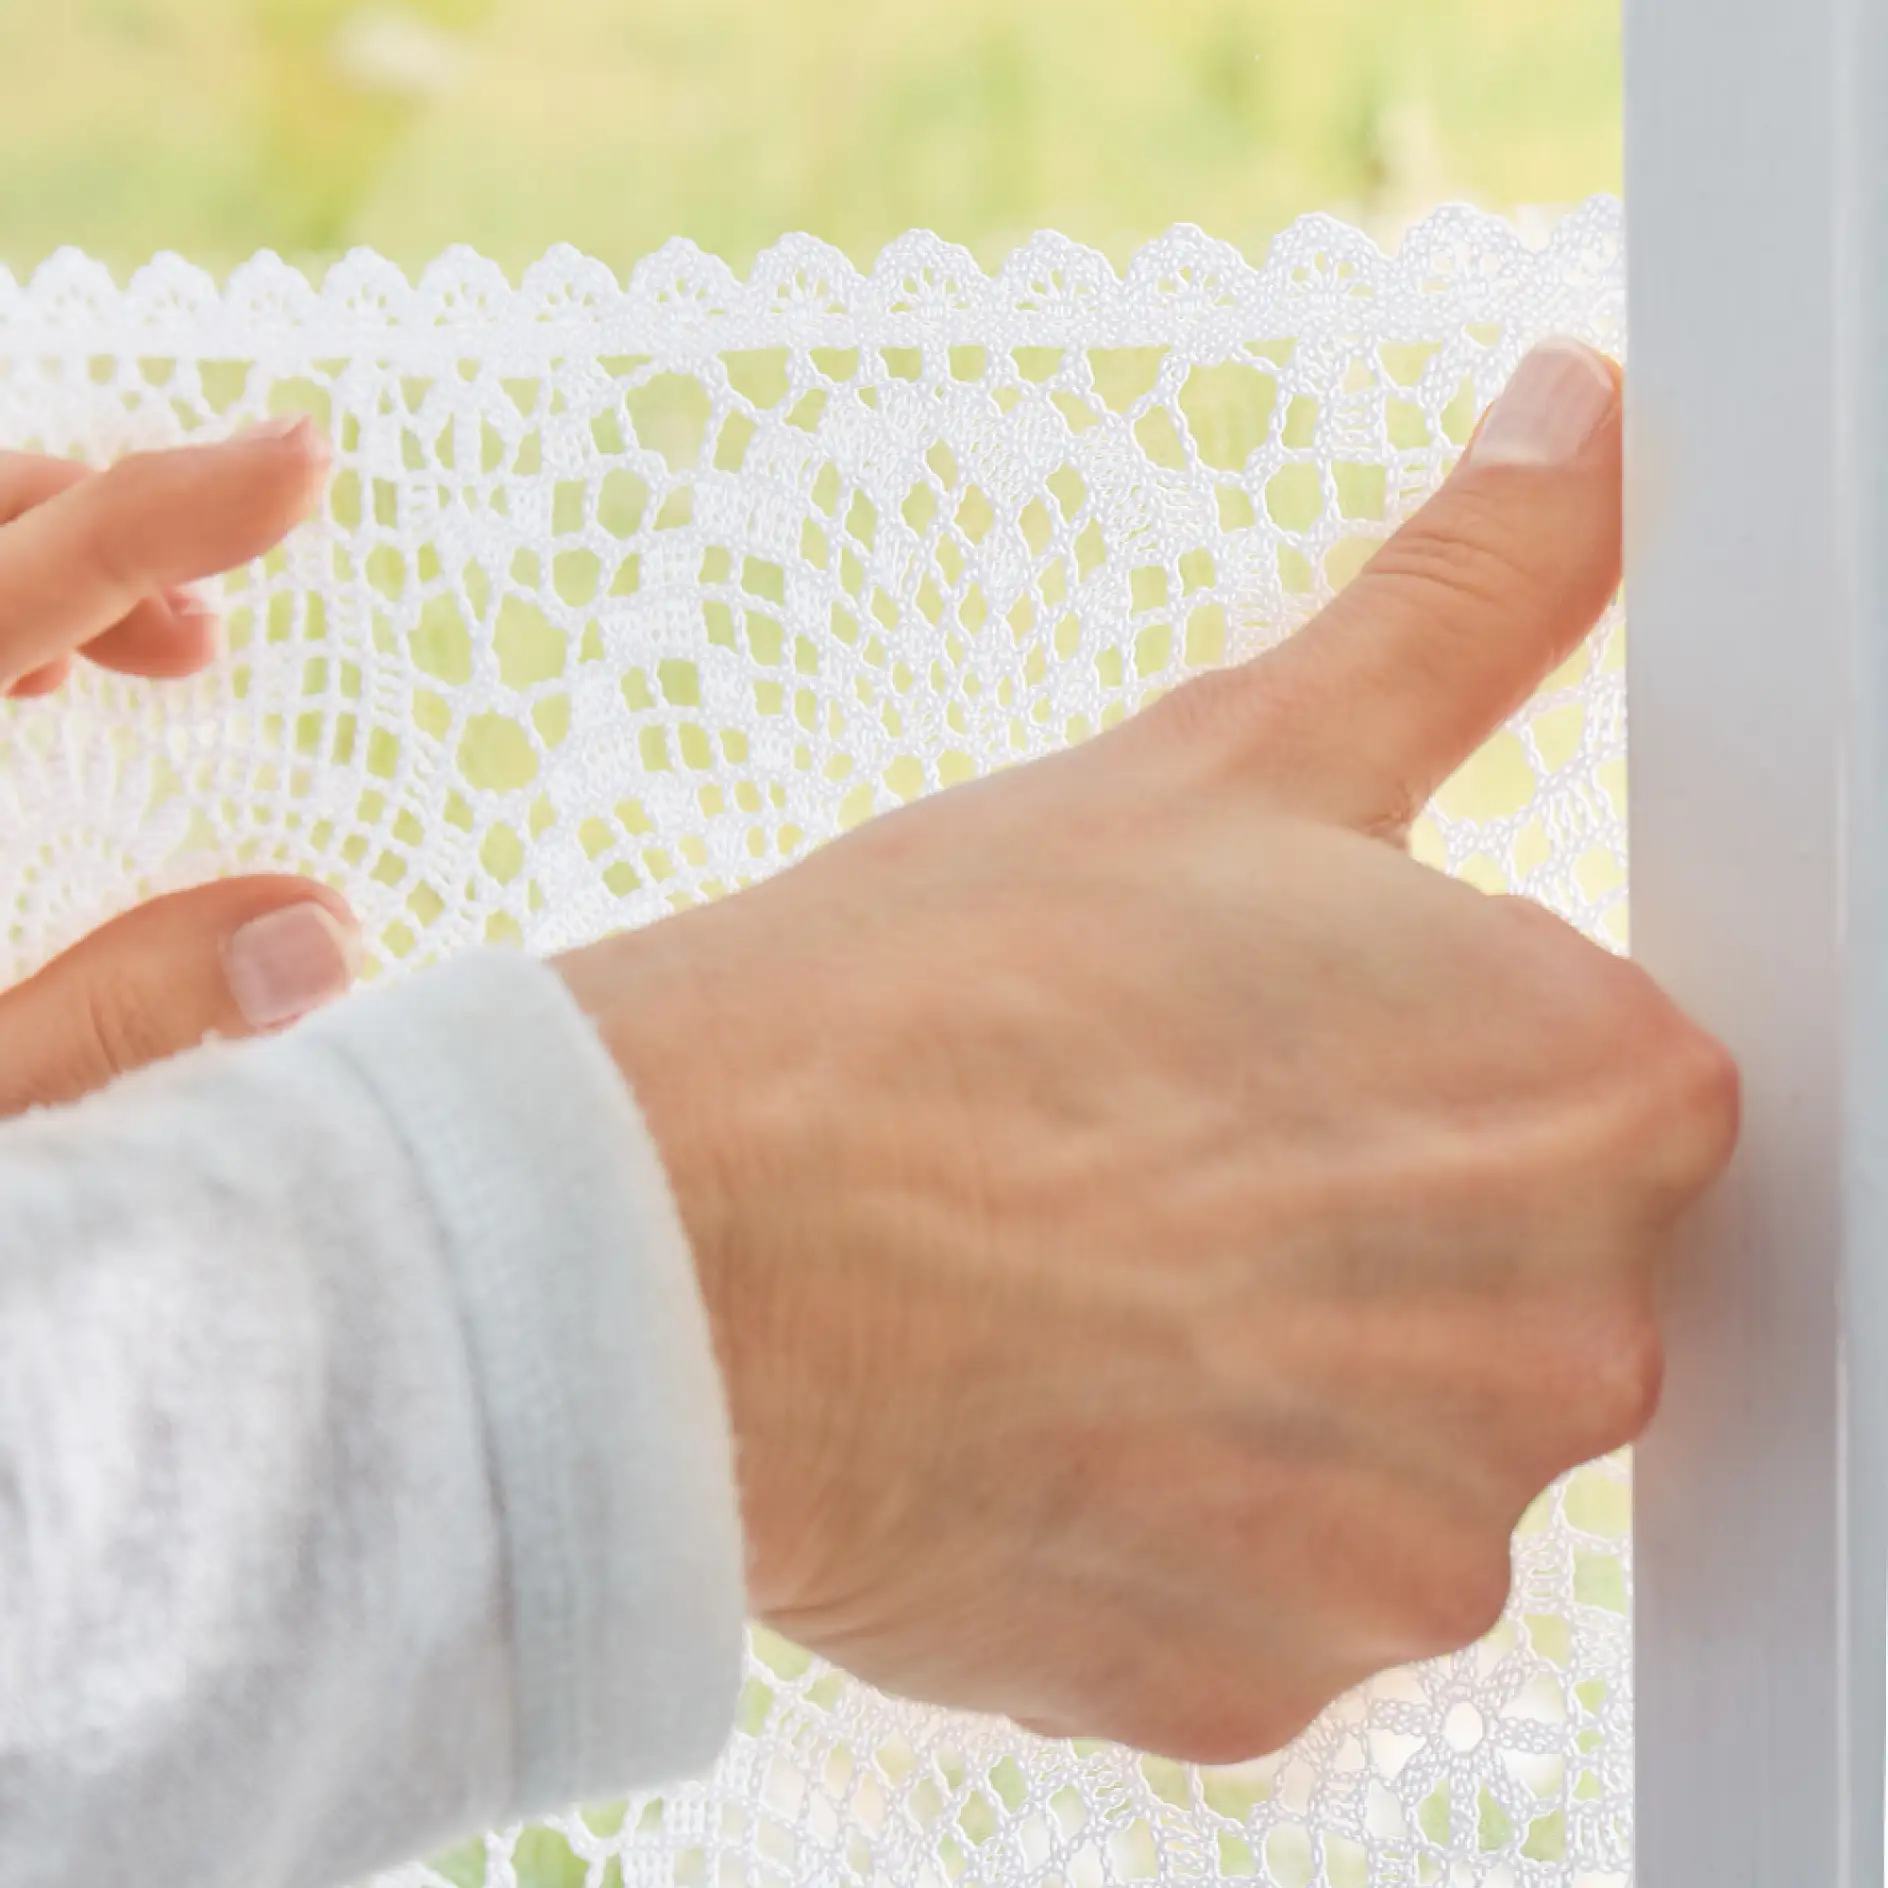 Applying the lace window treatment with tesa® Adhesive Strips for Transparent & Glass 0.2kg.